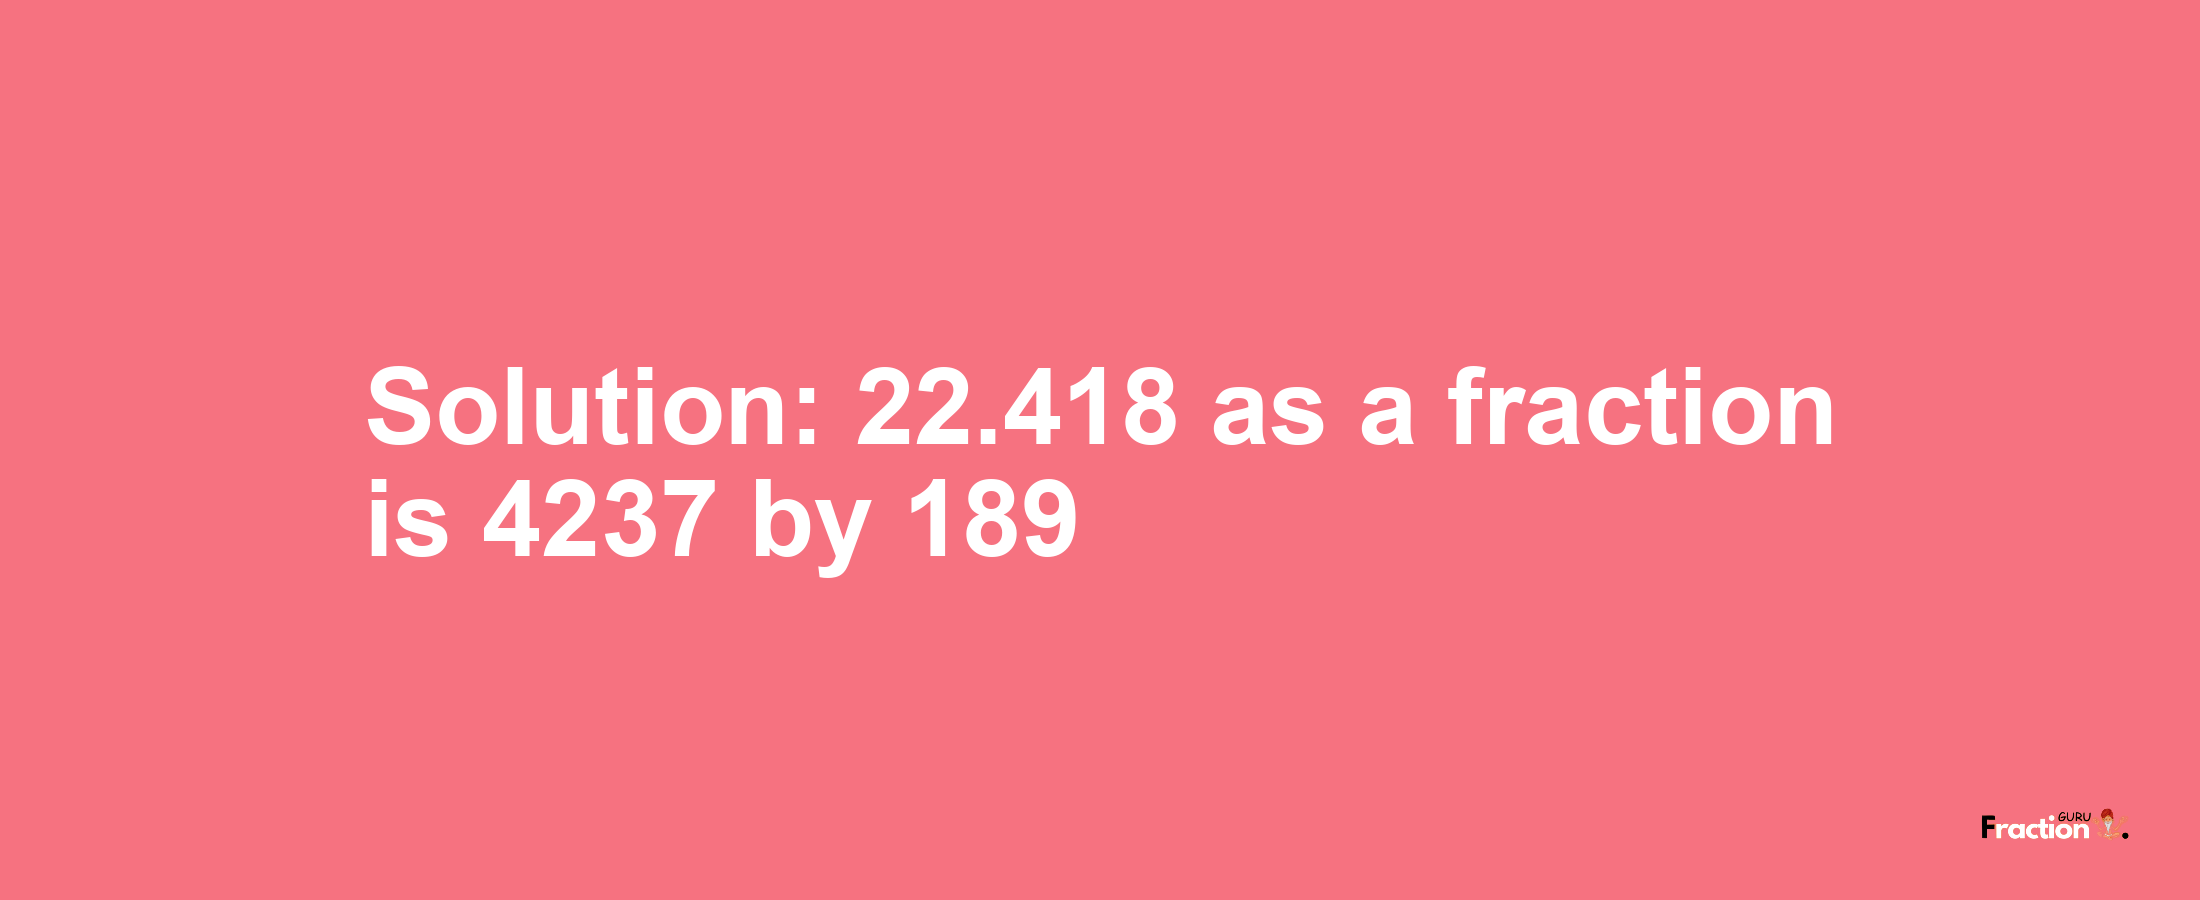 Solution:22.418 as a fraction is 4237/189